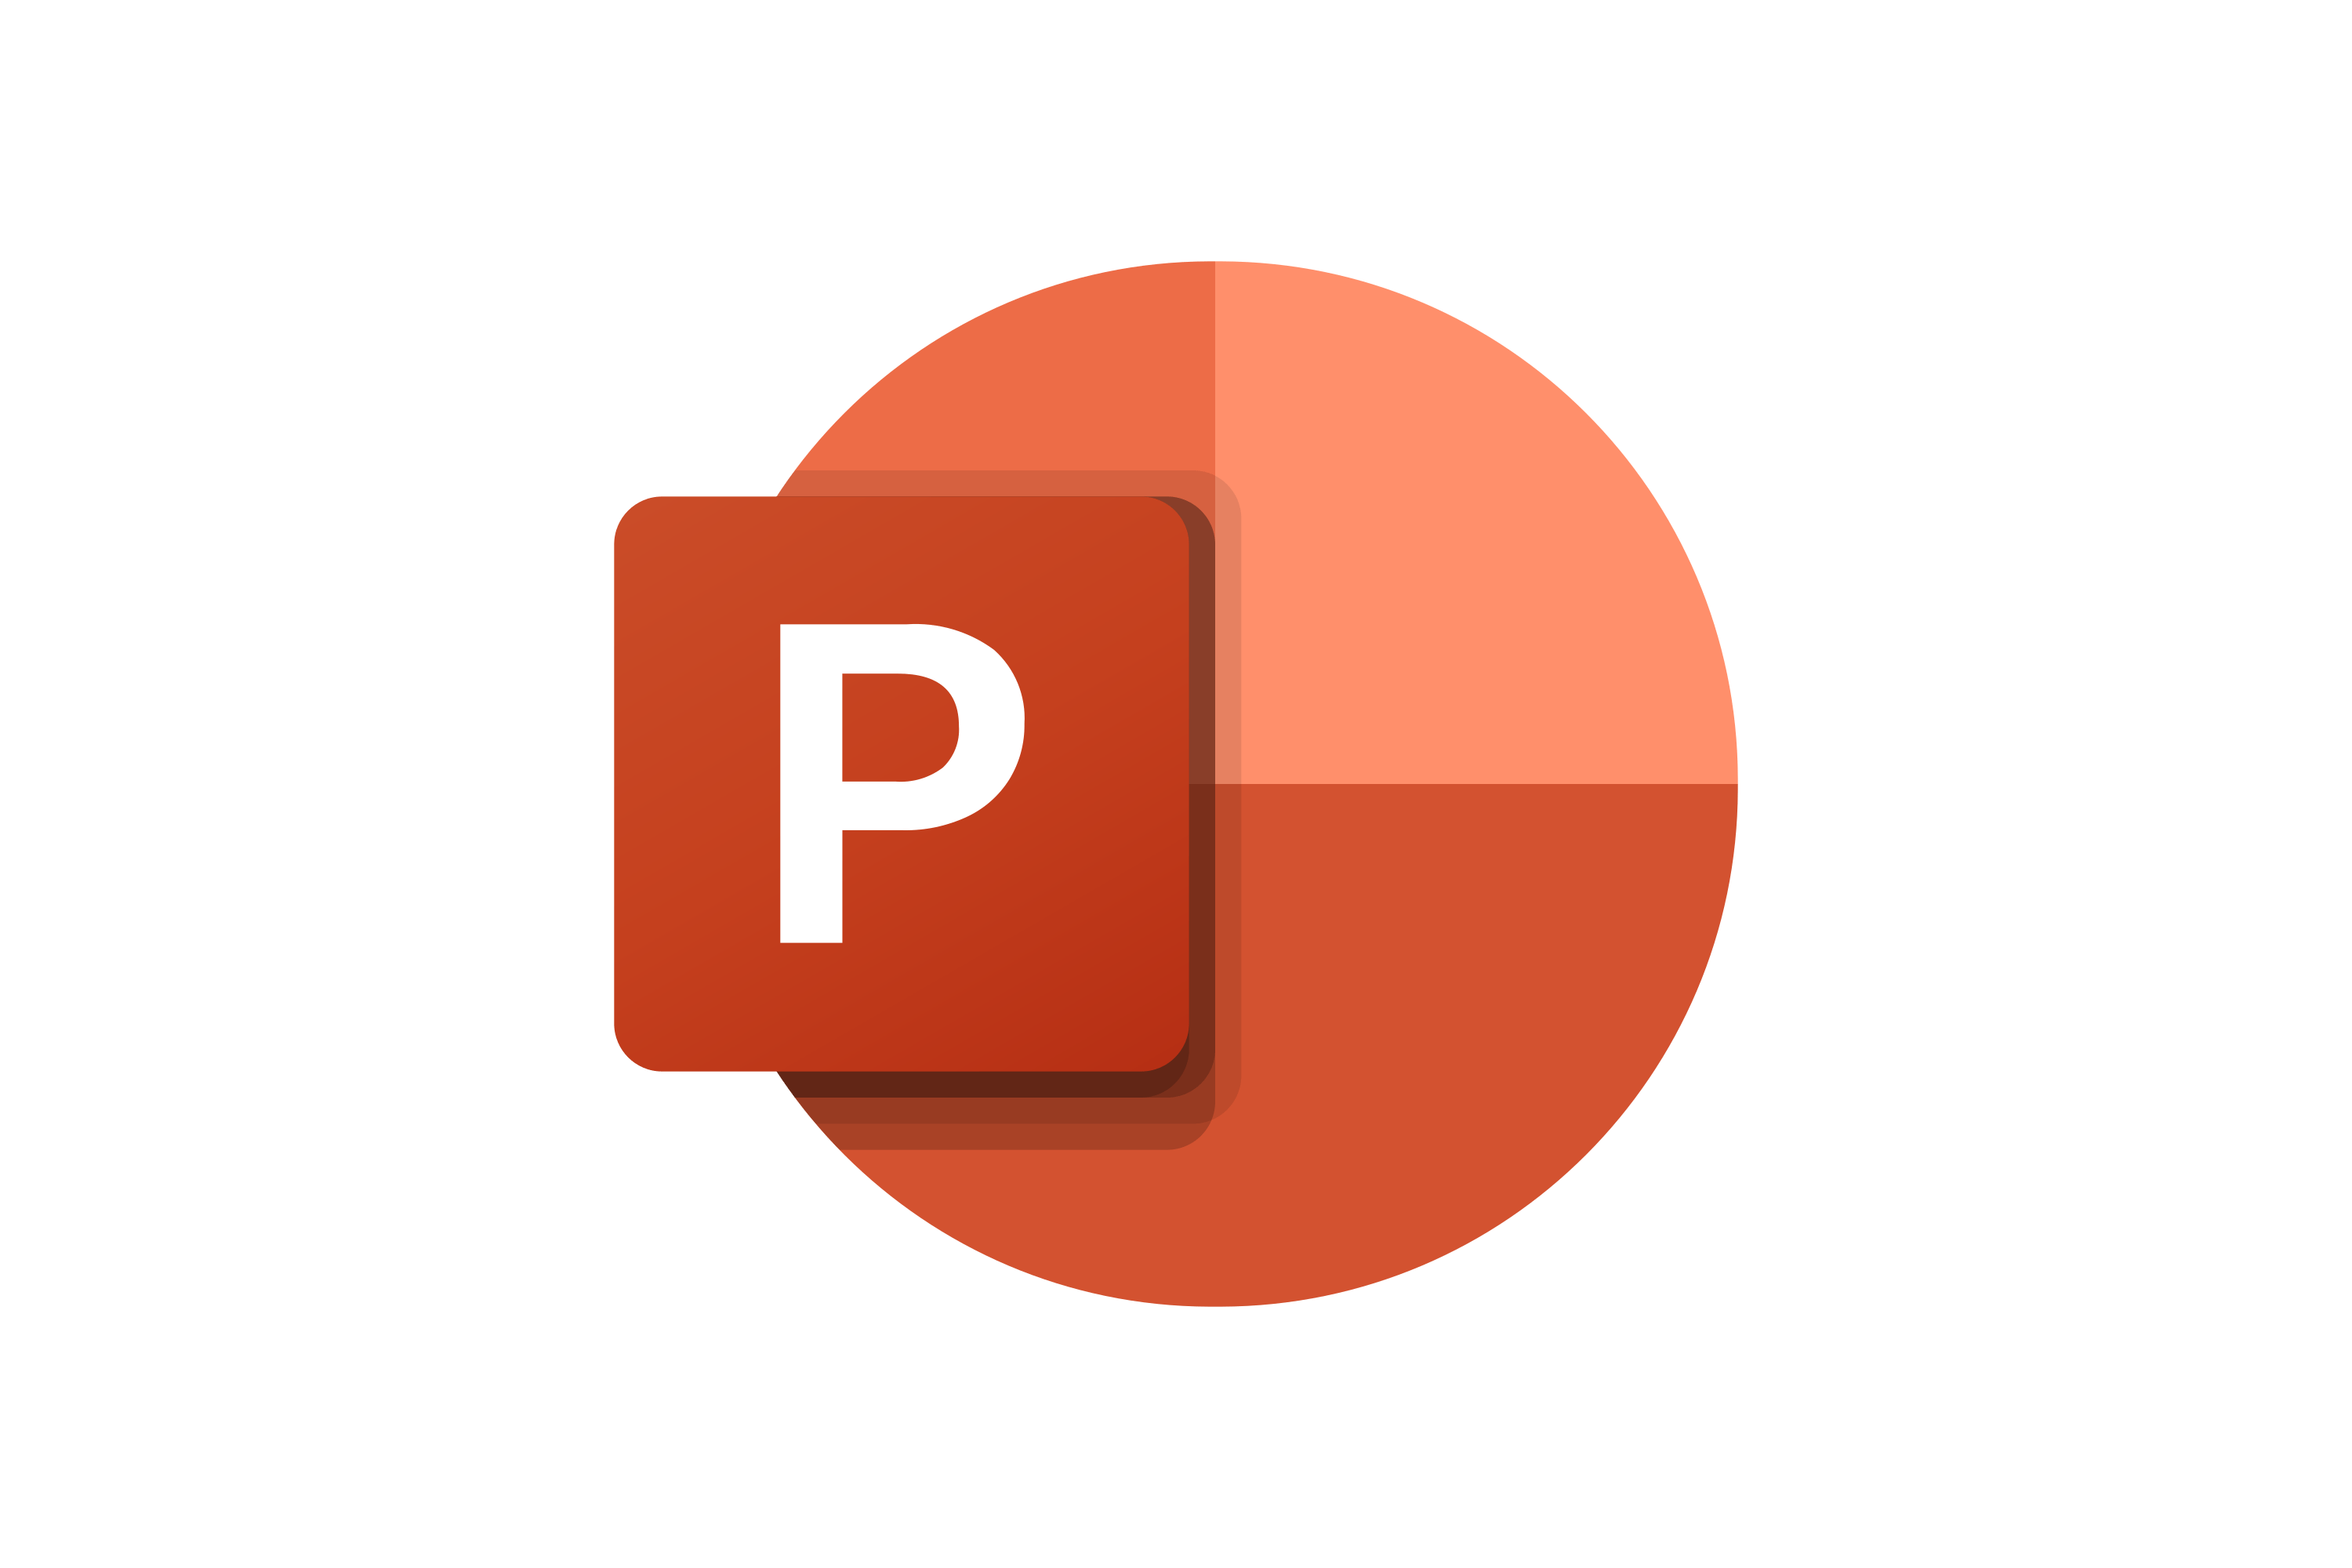 Download Microsoft PowerPoint Logo in SVG Vector or PNG File Format - Logo .wine